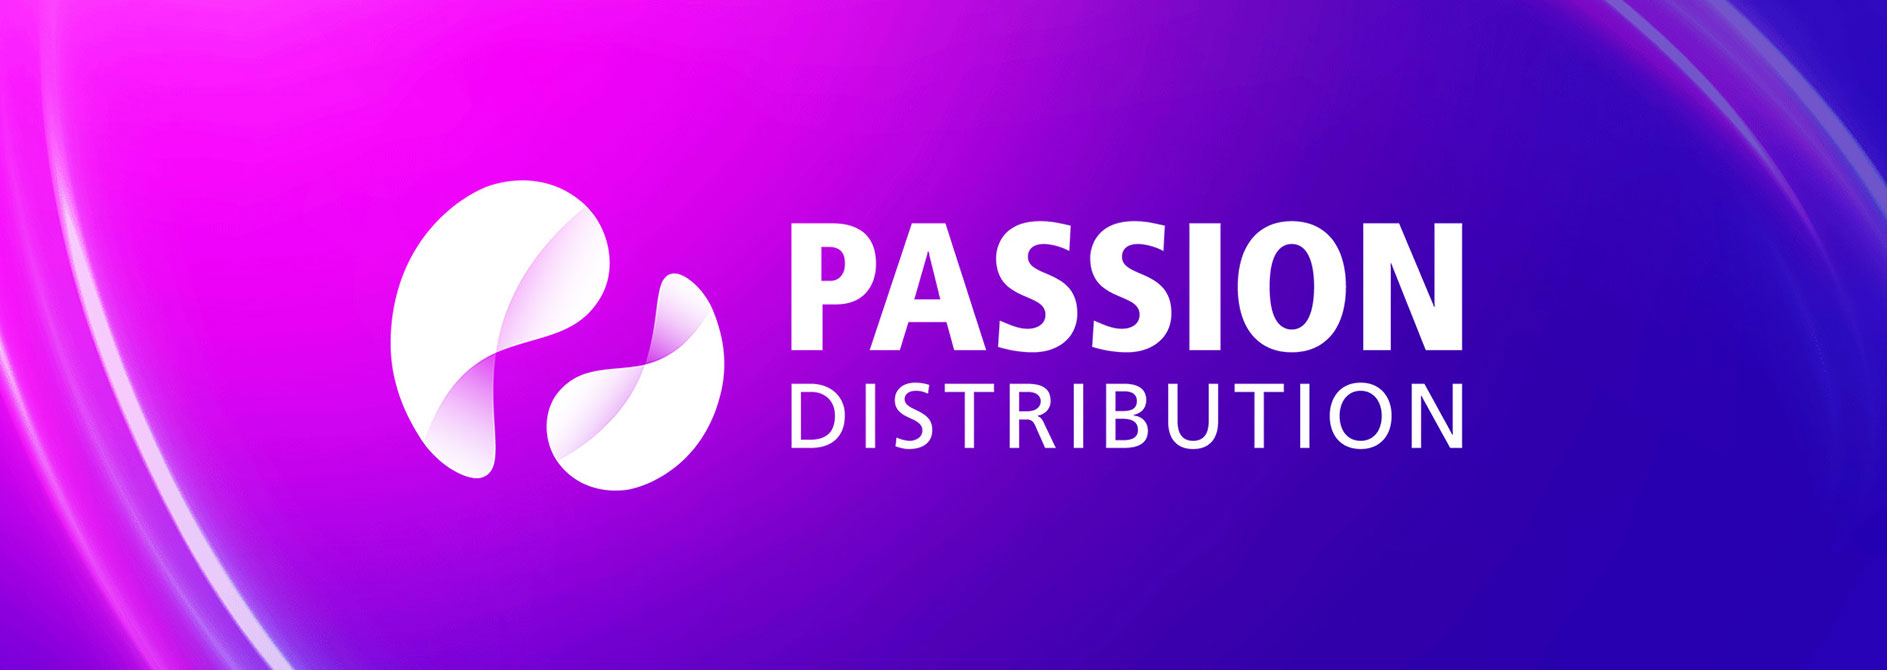 Passion Distribution Takes a Proactive Approach to Delivering Multi-Format Content